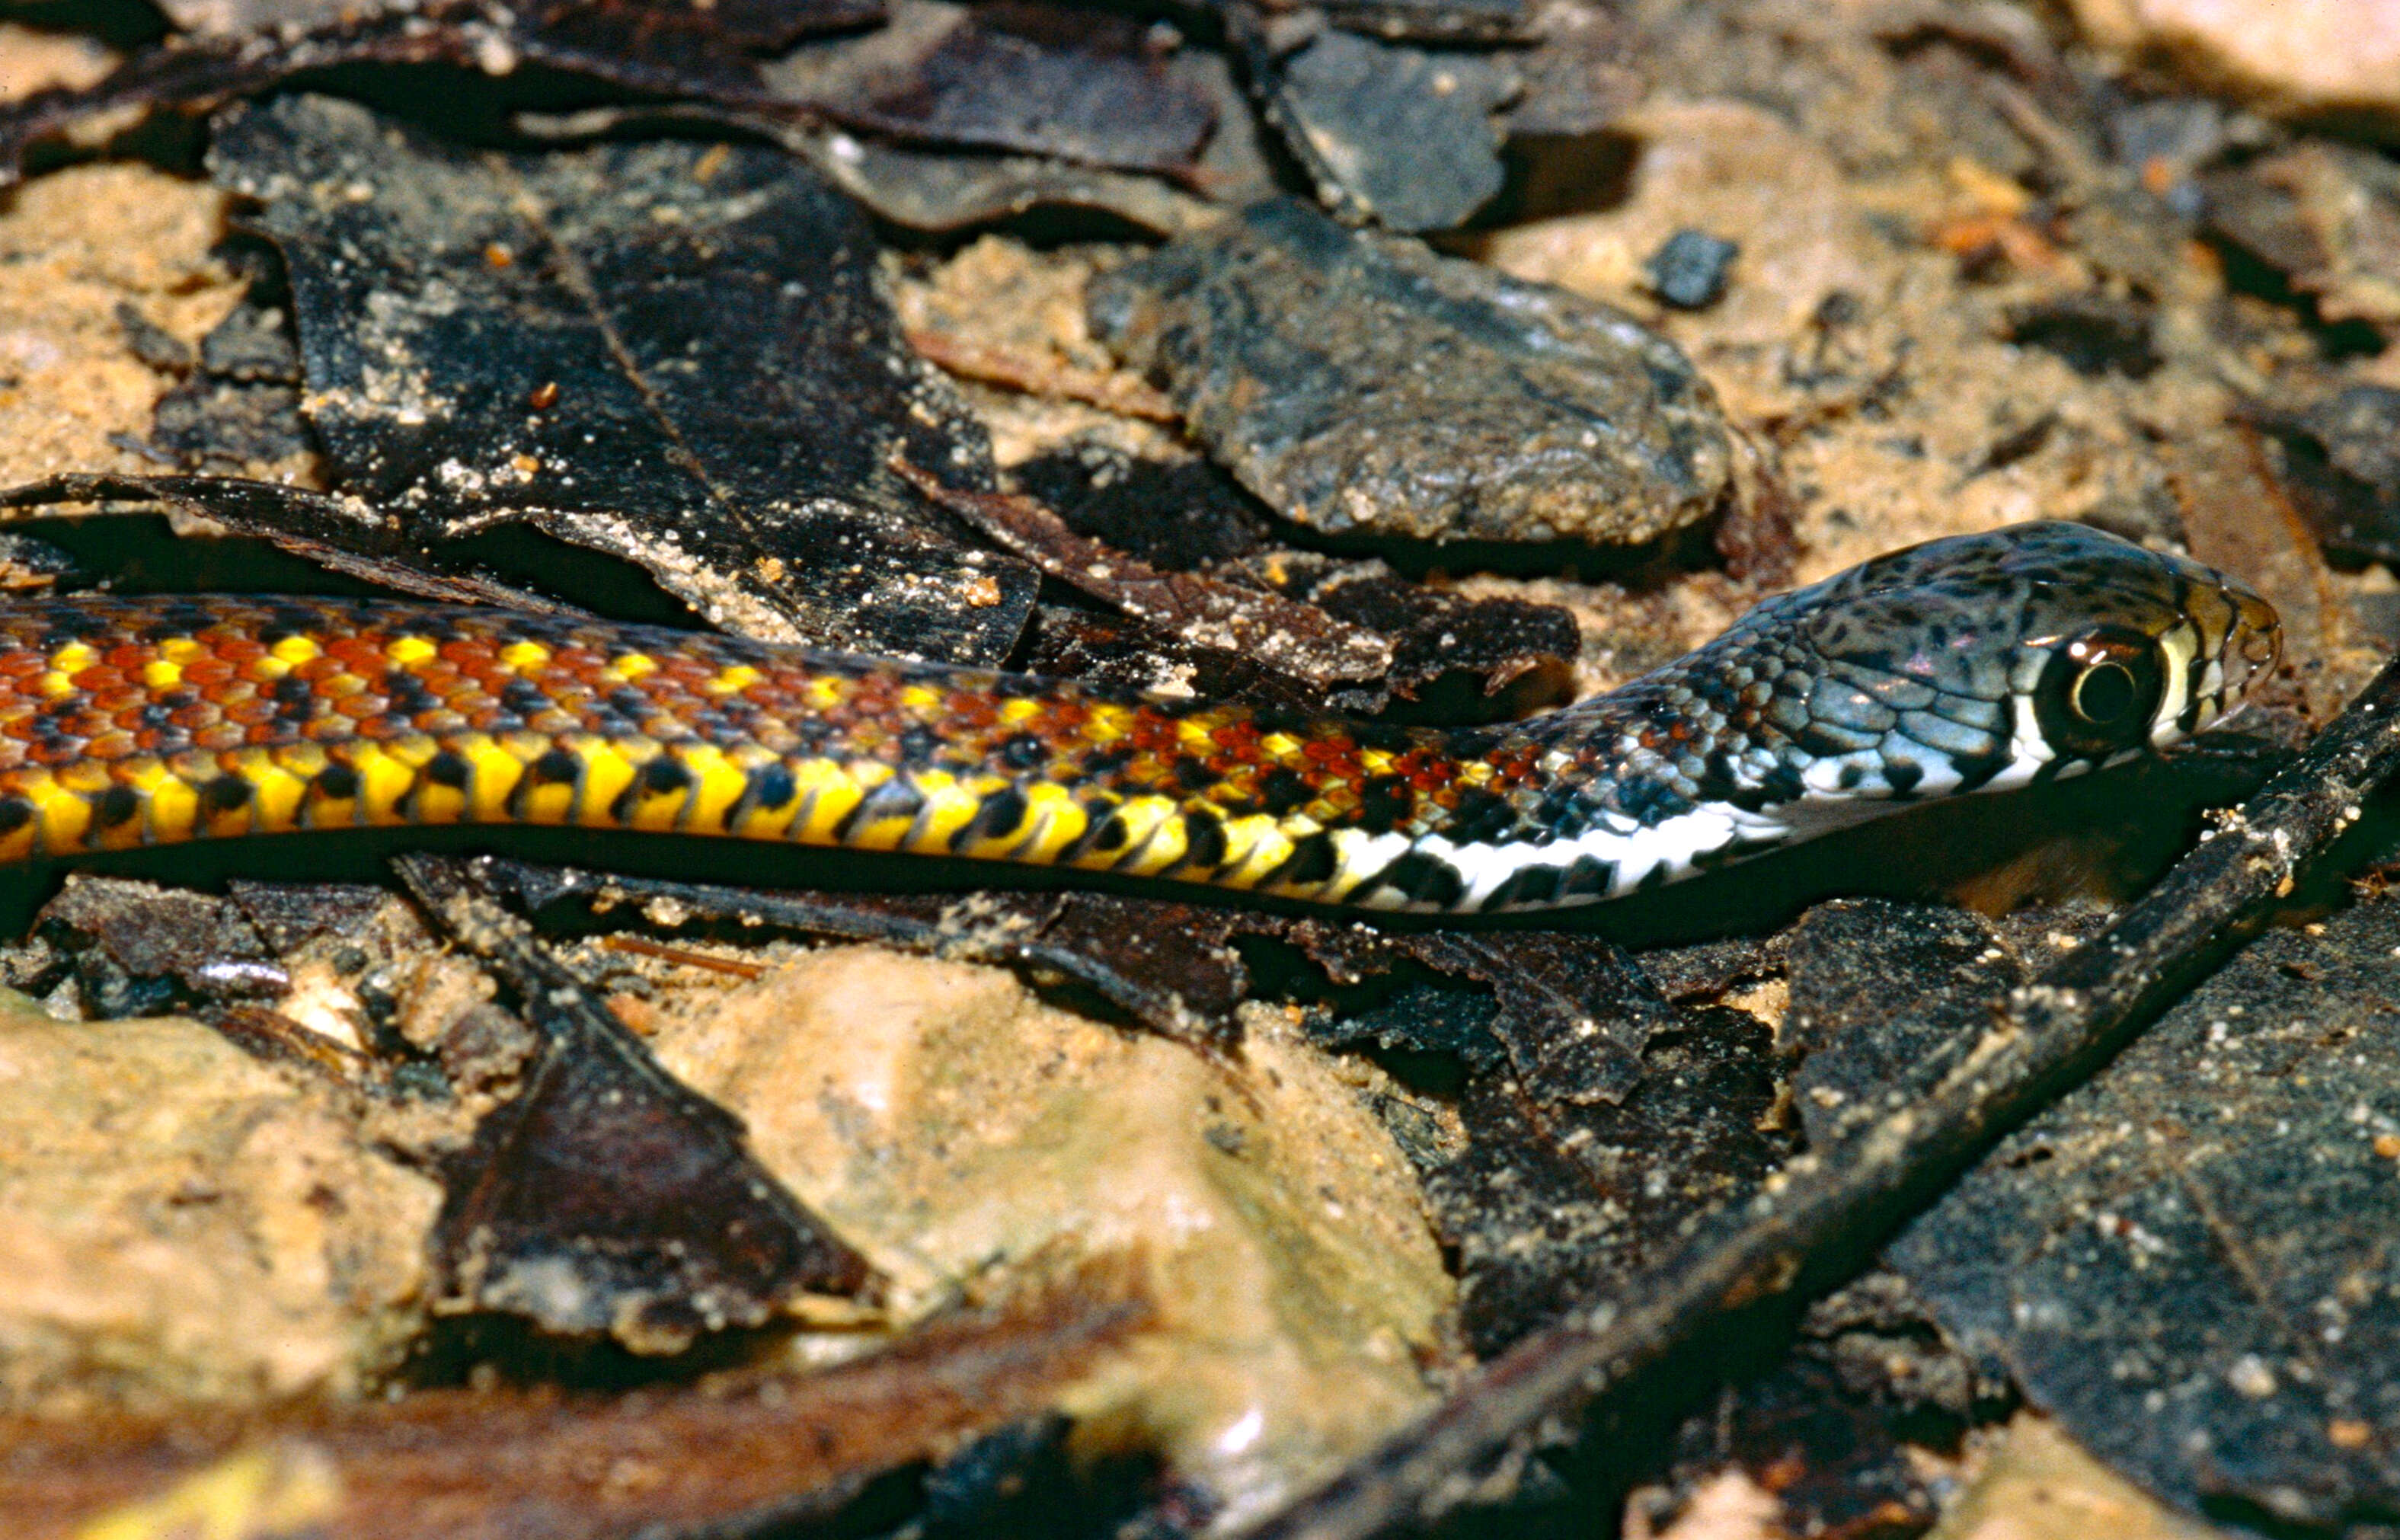 Image of Xenochrophis Günther 1864